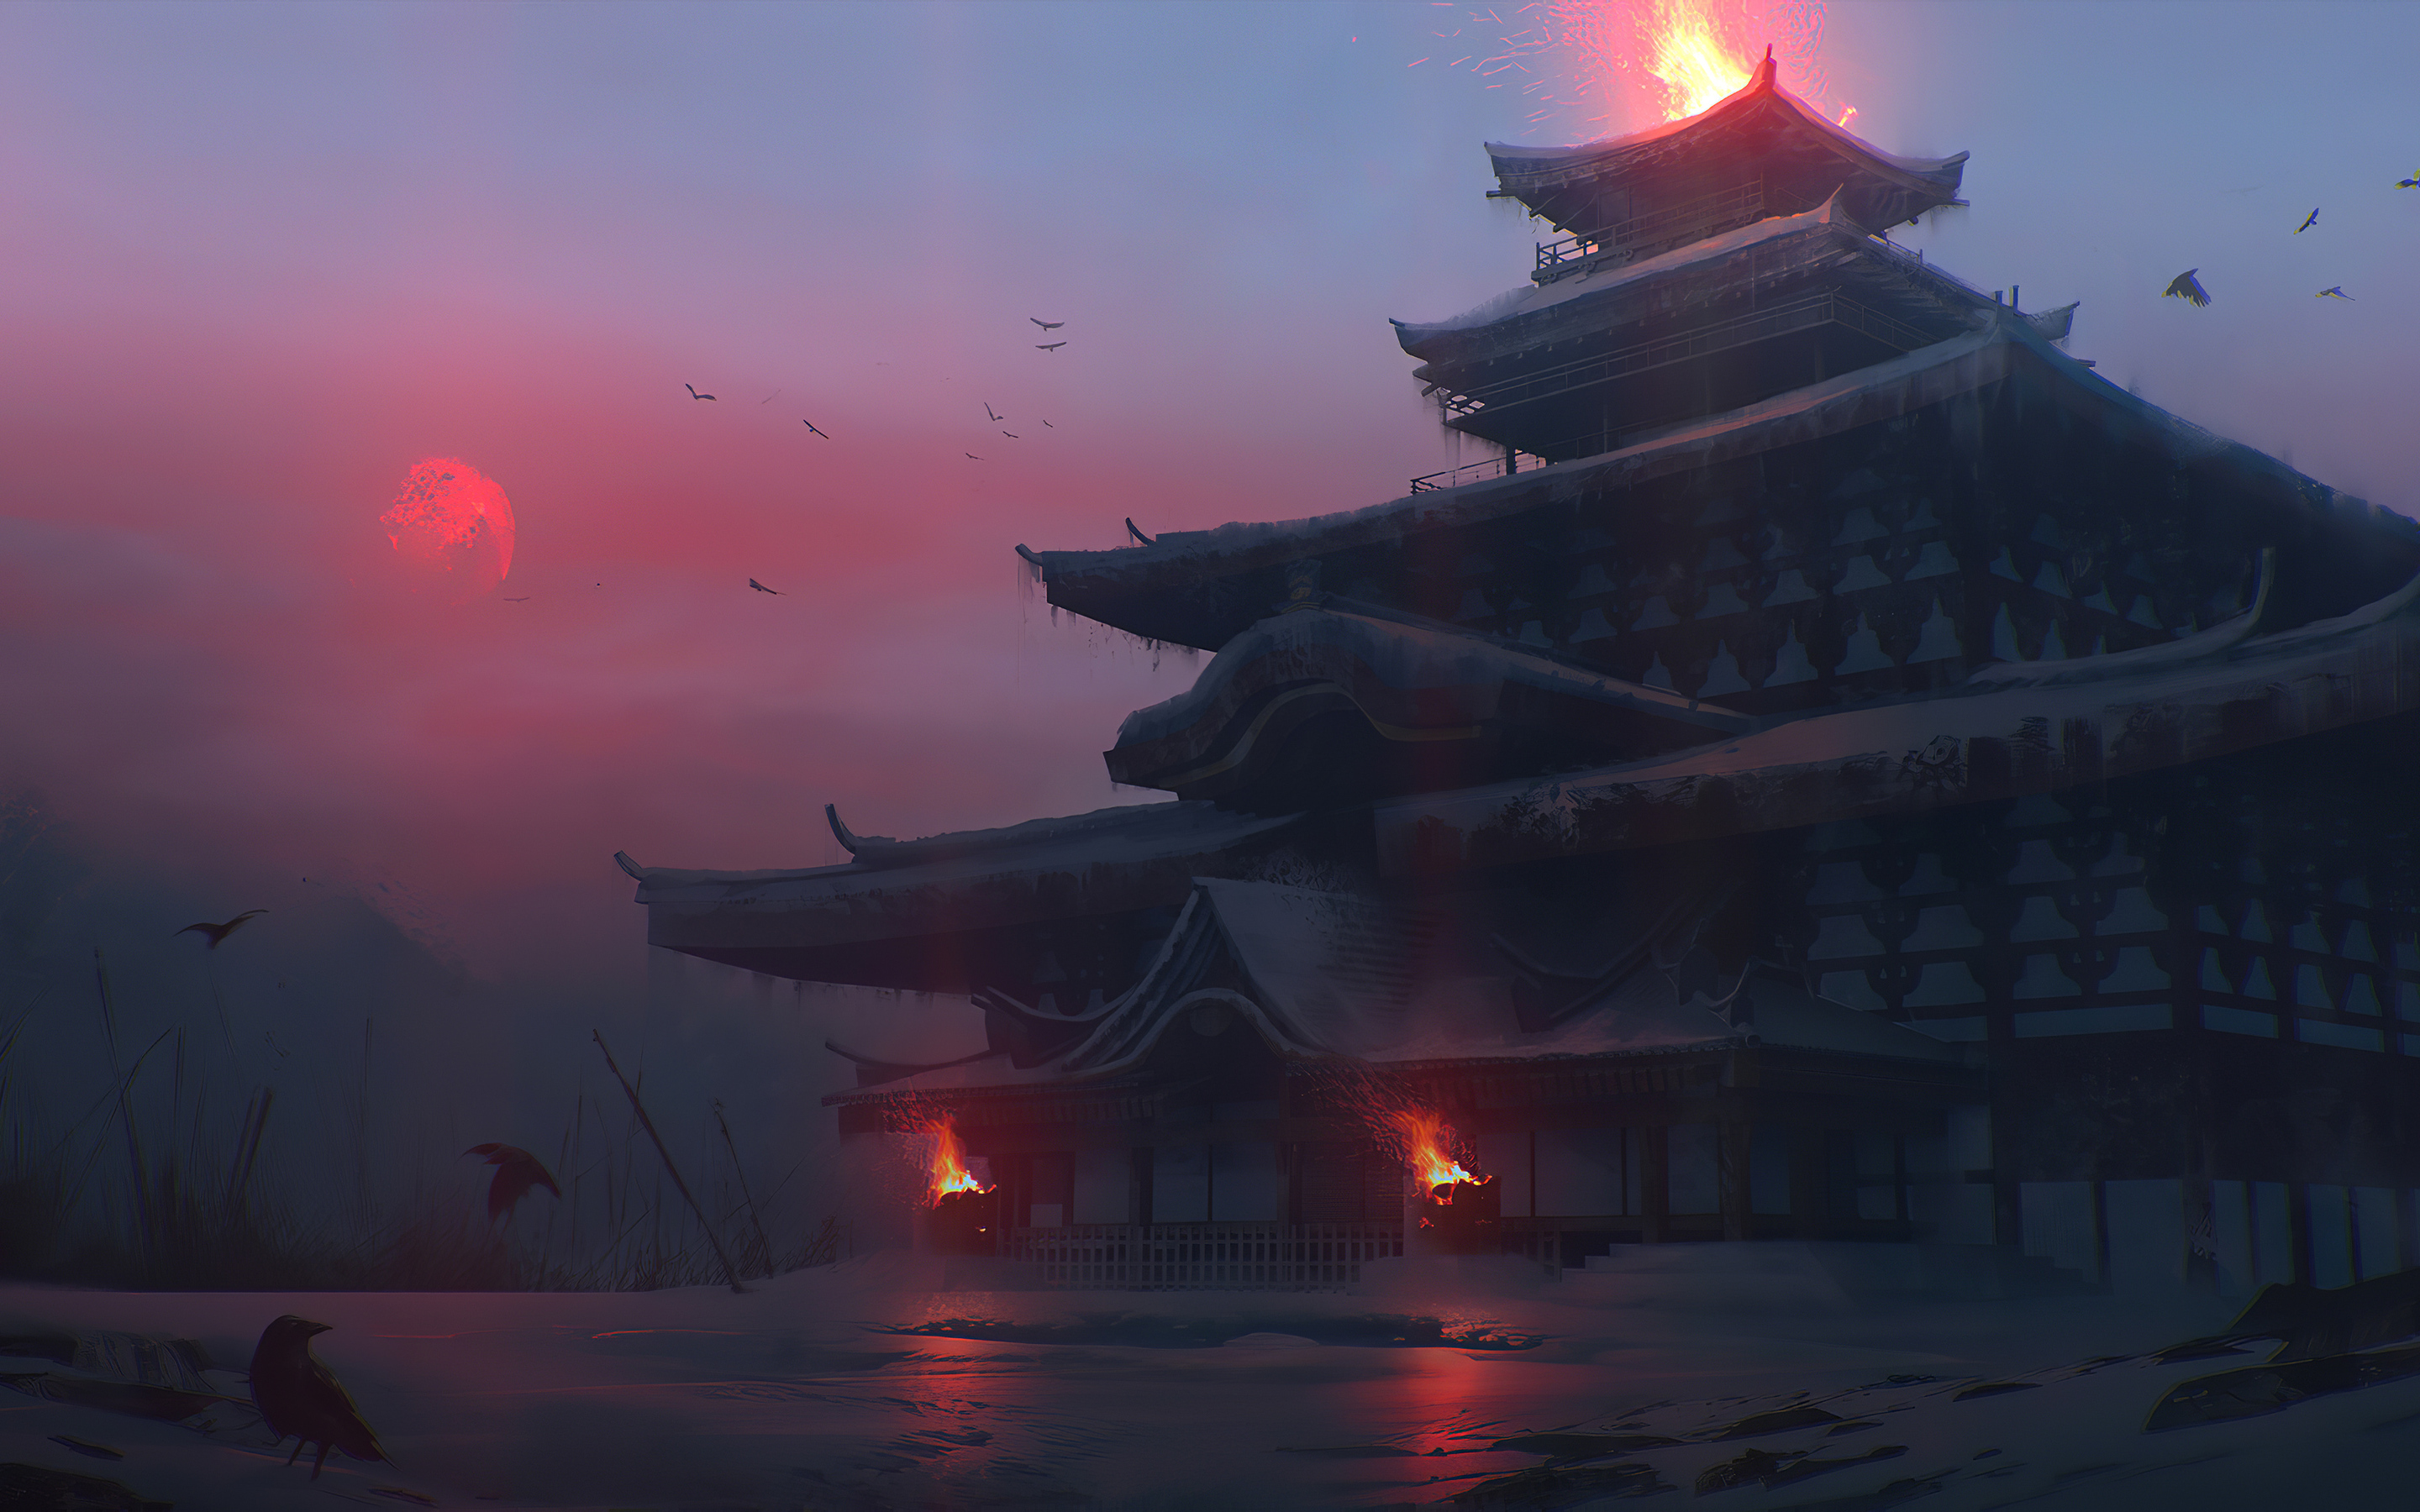 Japan Wallpaper 4K Animated - Anime Scenery - Other & Anime Background ...